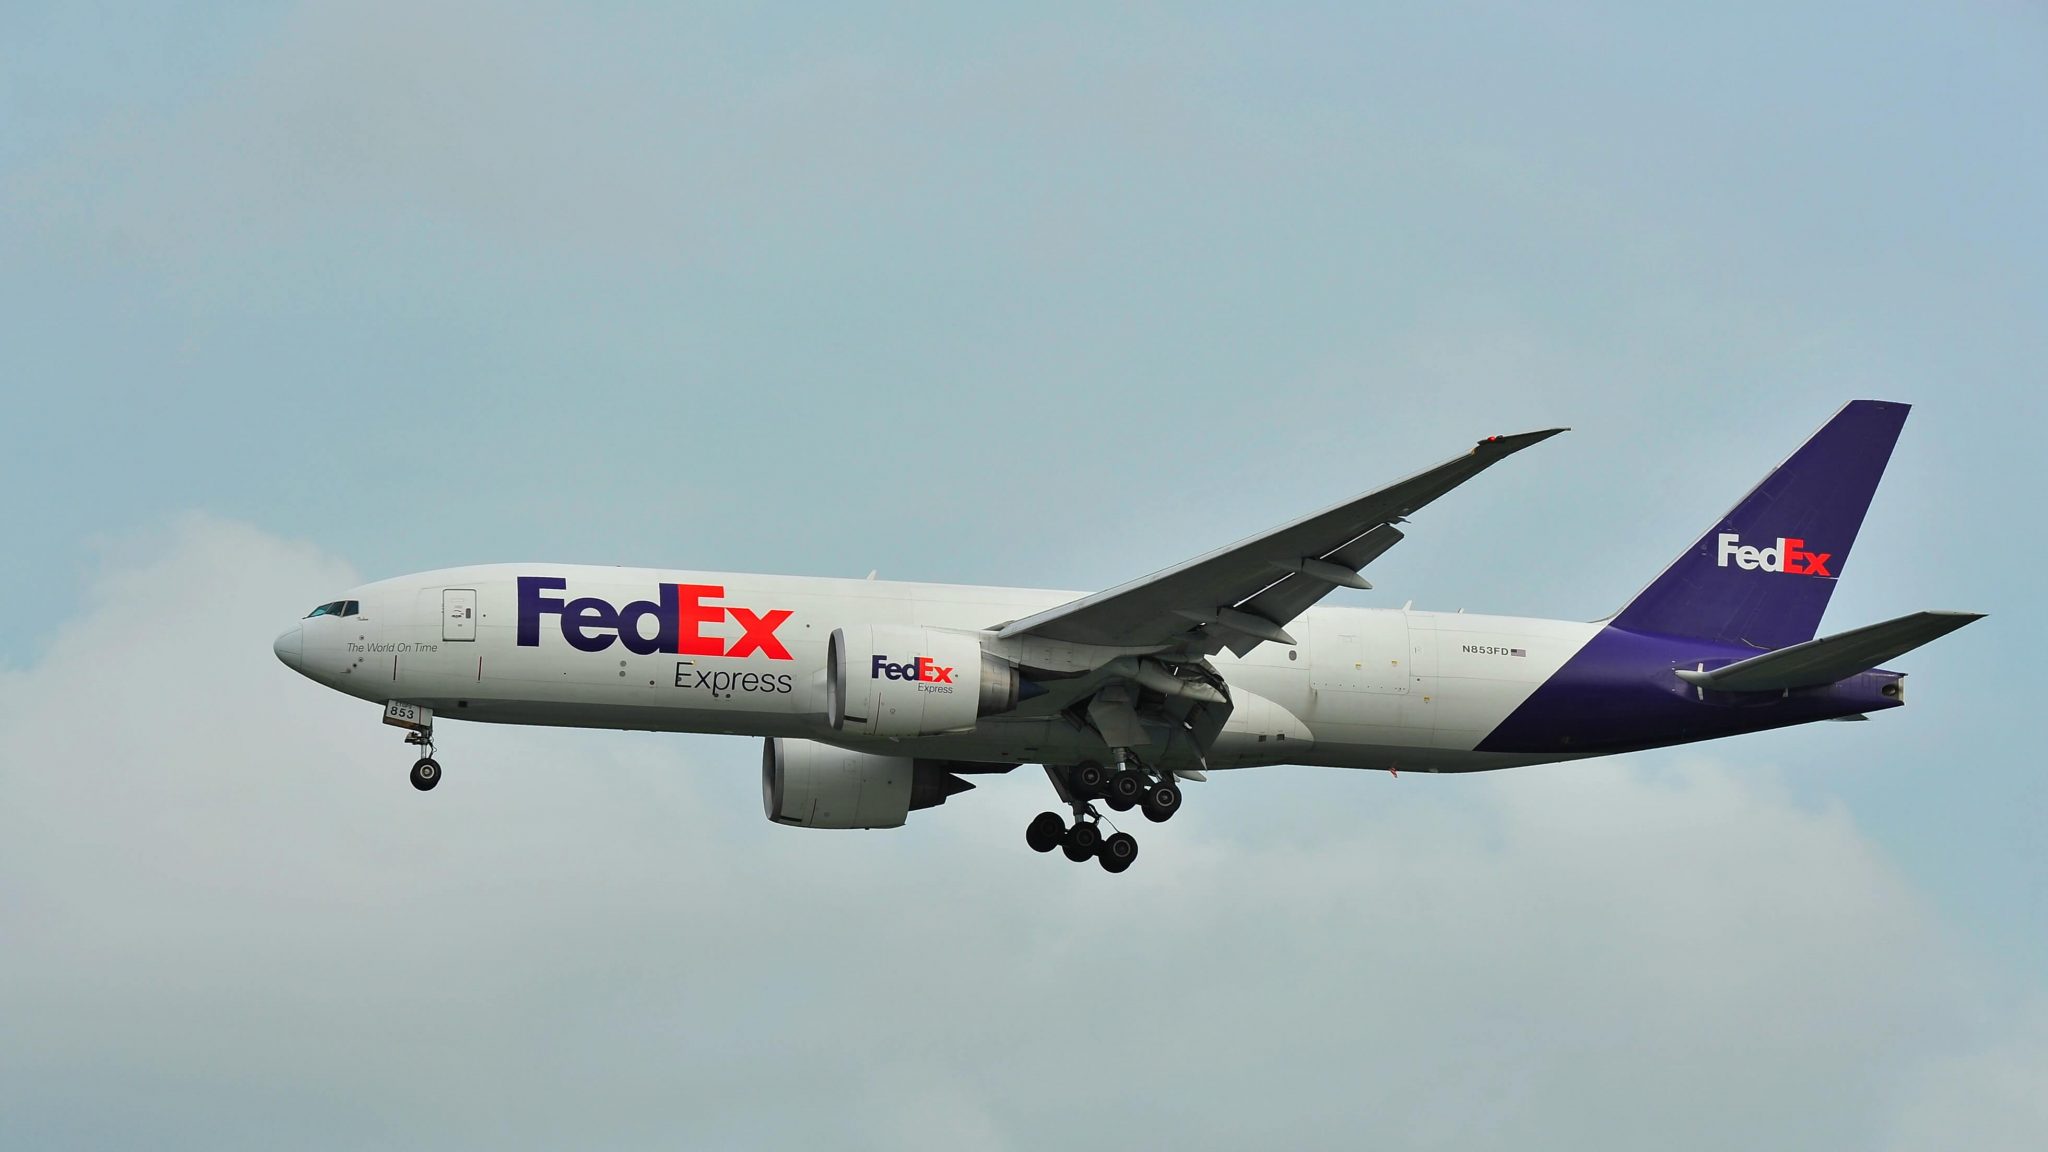 FedEx Express orders 24 freighters